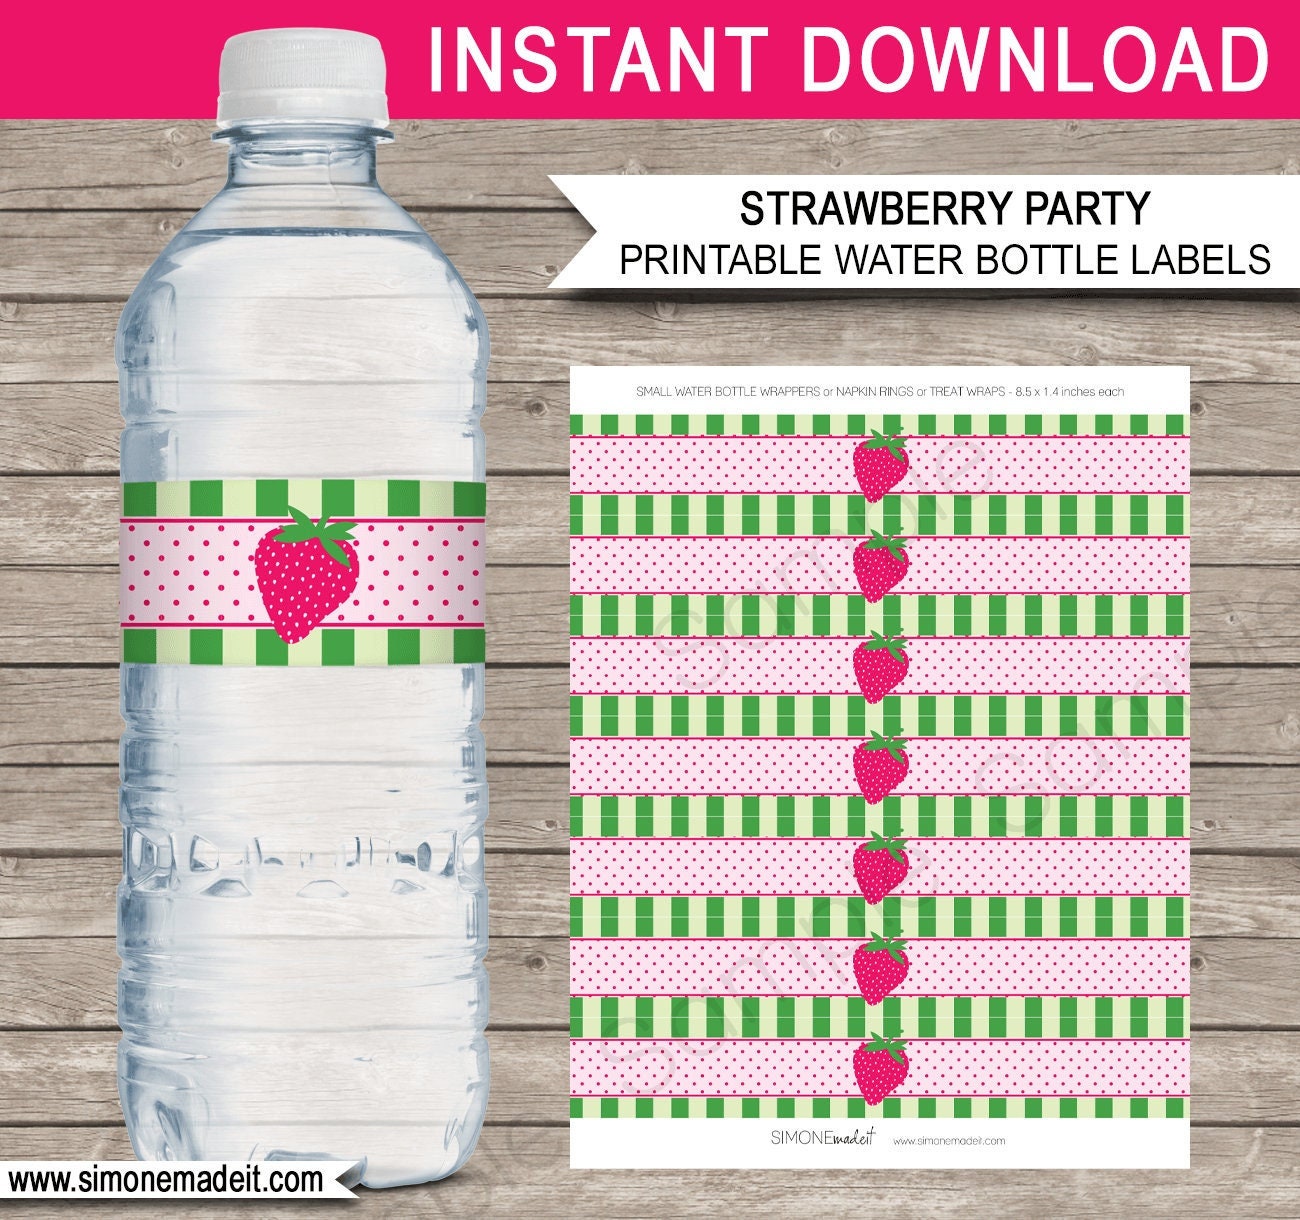 Spiderman Birthday Water Bottle Label Template to Print at Home